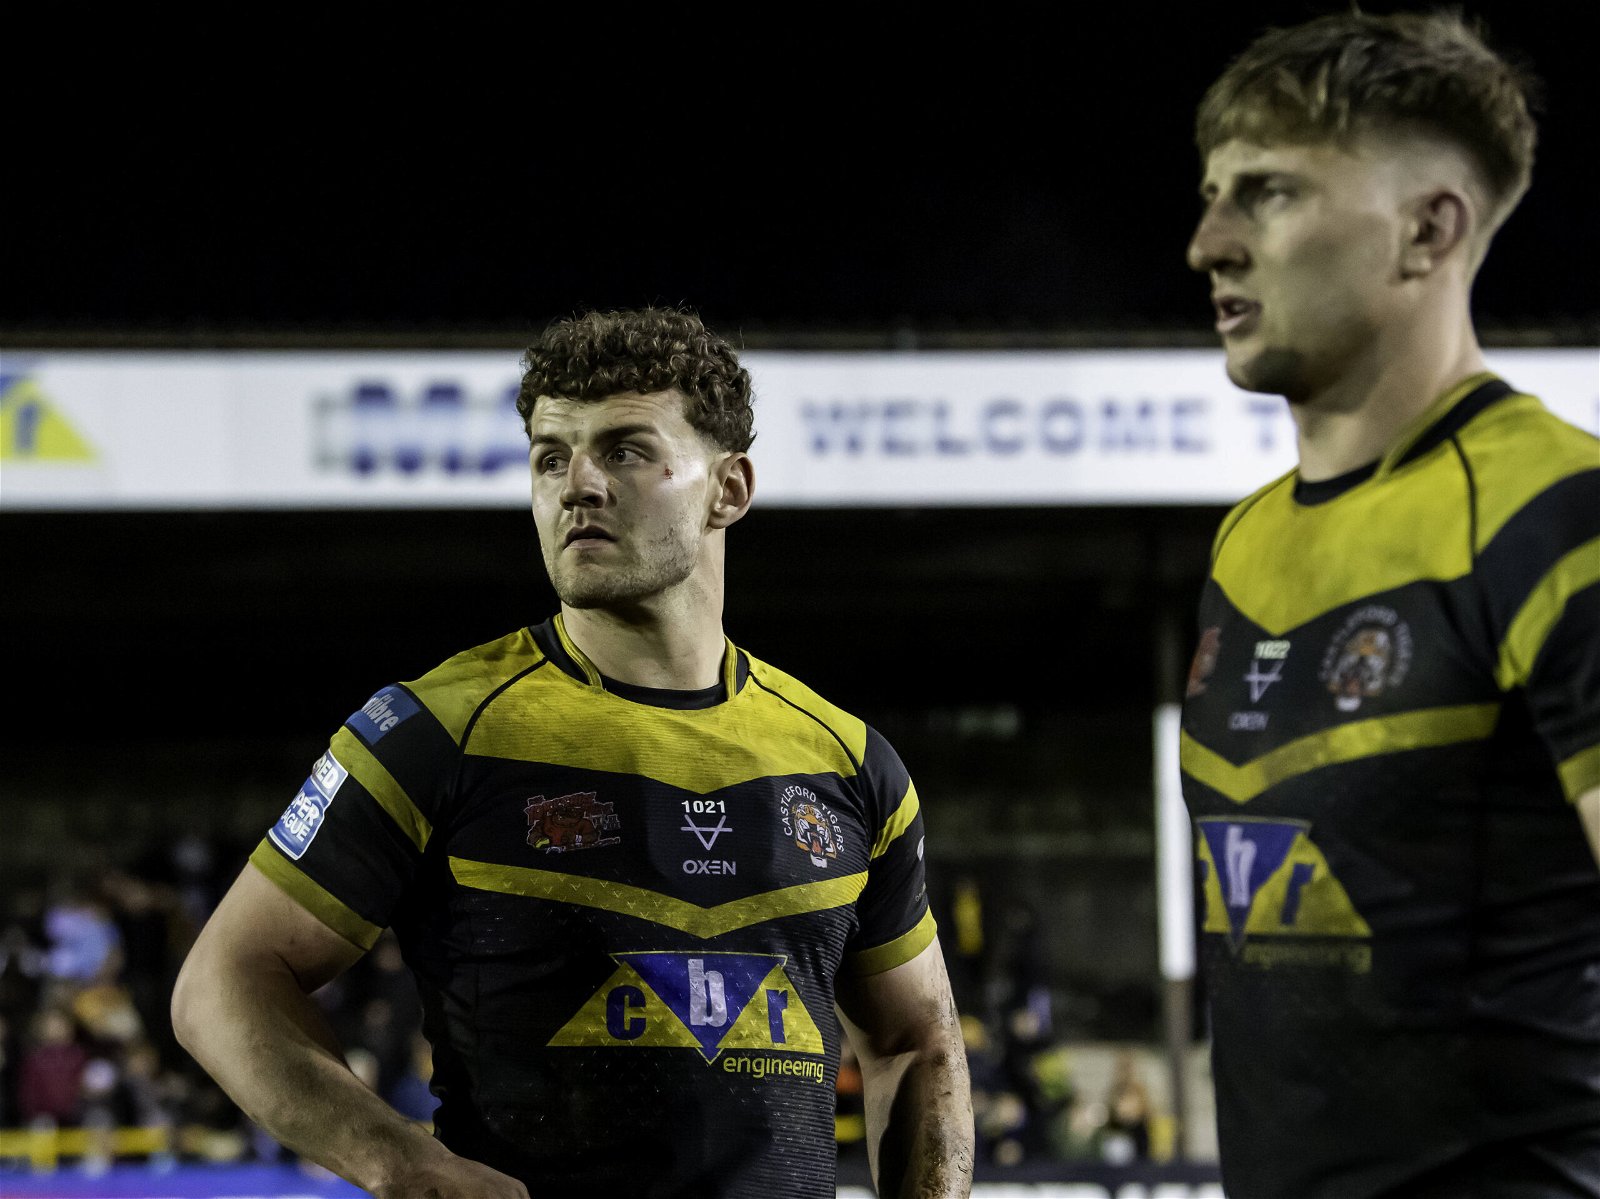 Castleford Tigers players George Lawler & Alex Mellor dejected after their side's loss to Leeds.